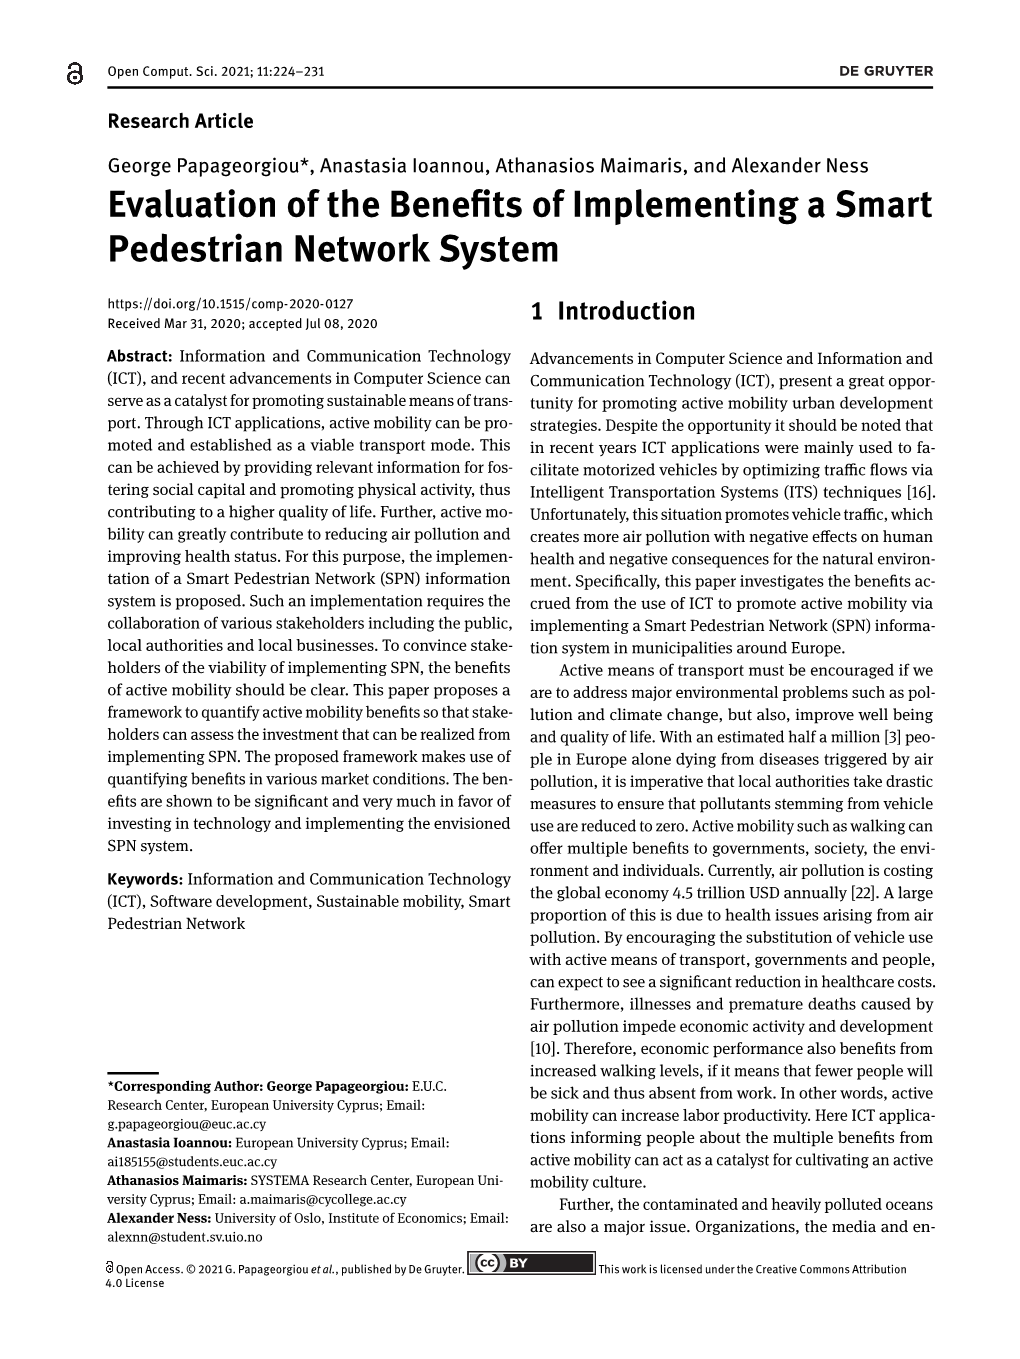 Evaluation of the Benefits of Implementing a Smart Pedestrian Network System